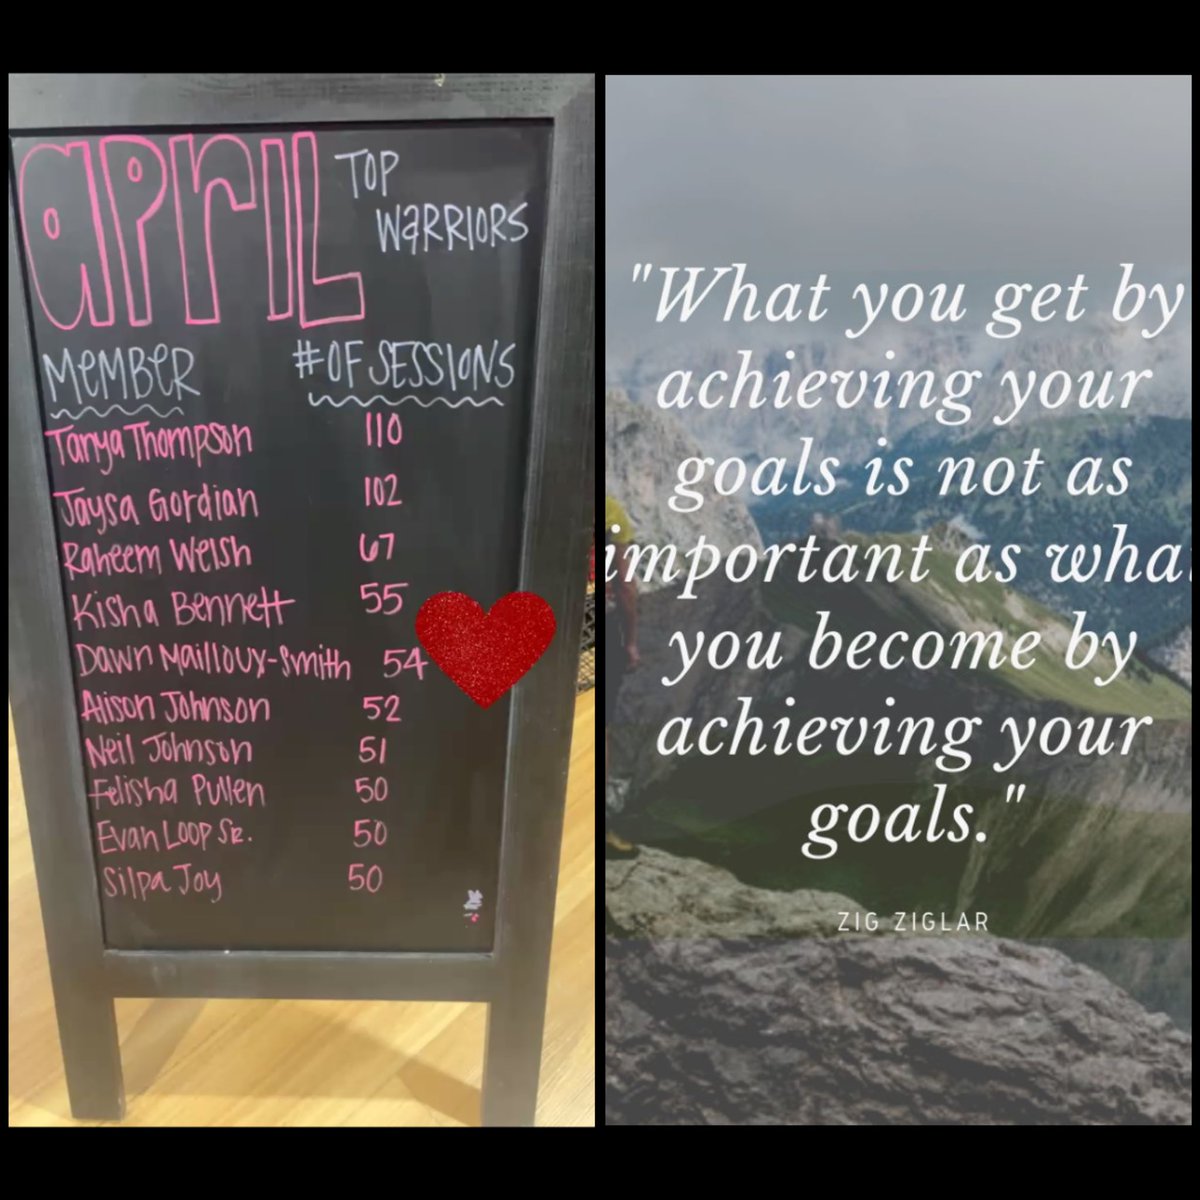 4th consecutive month on the Top Warrior board at my gym #MondayMotivation #Goals #ZigZiglar